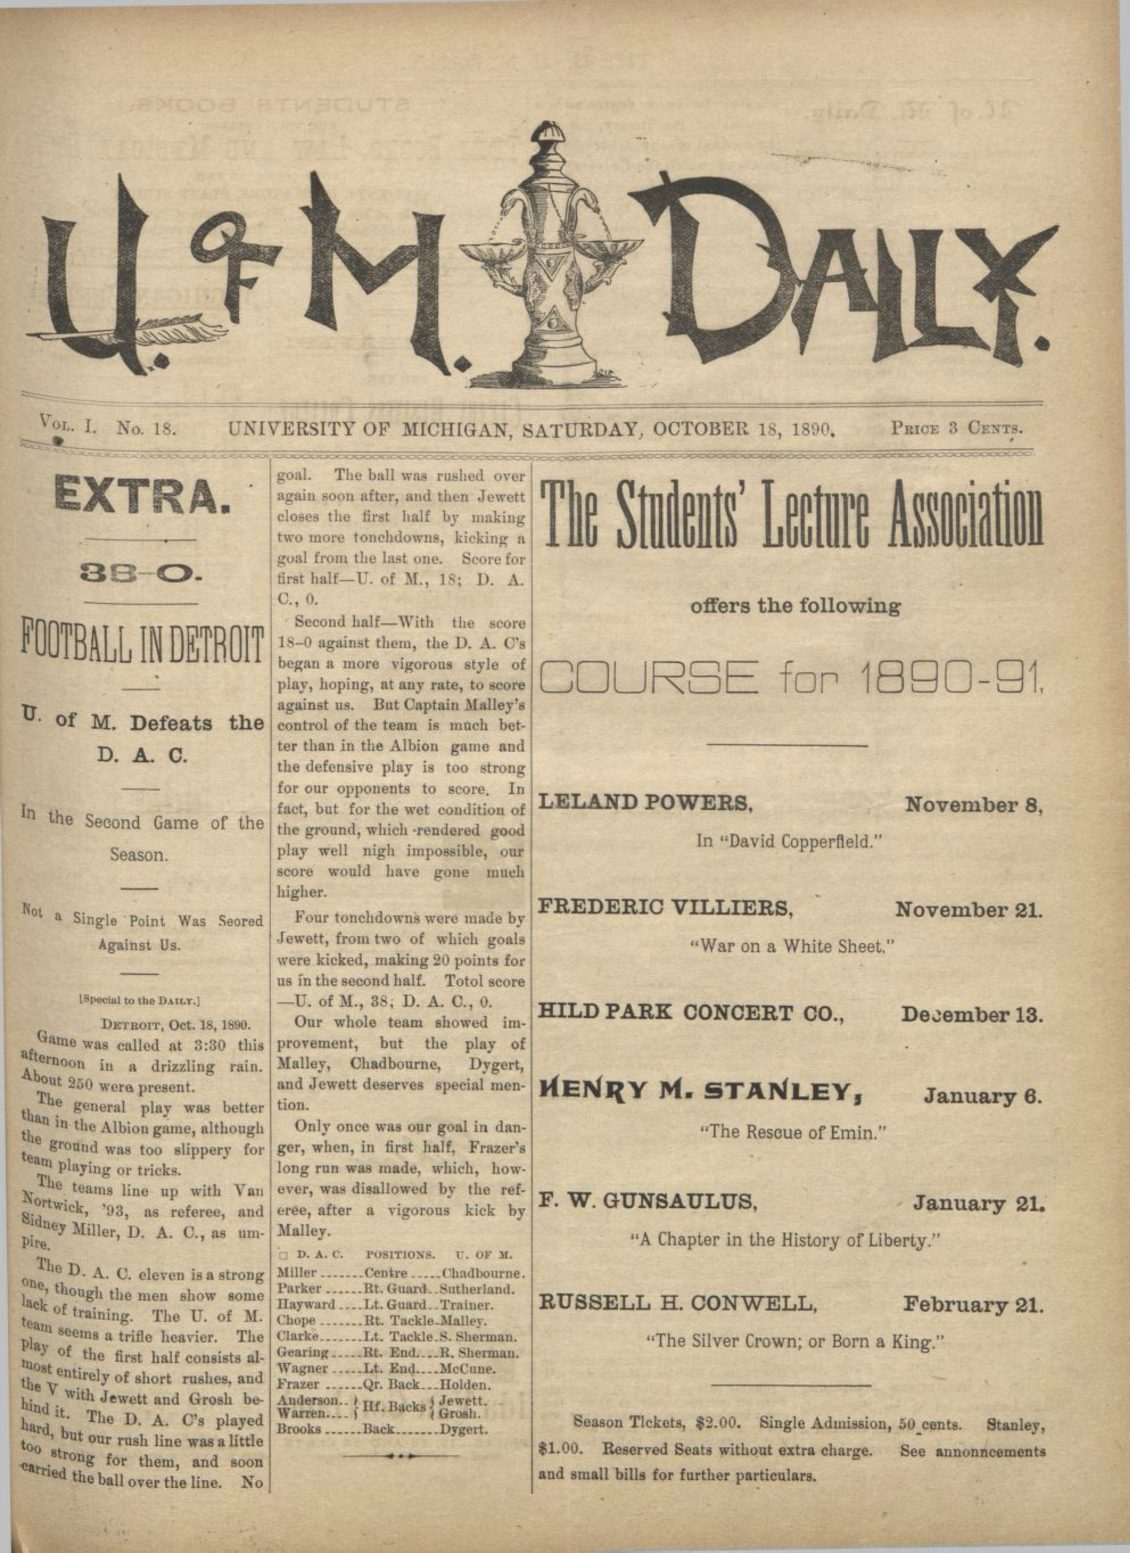 First page of a newspaper, including stylized text for the title, U of M Daily, and text below it.